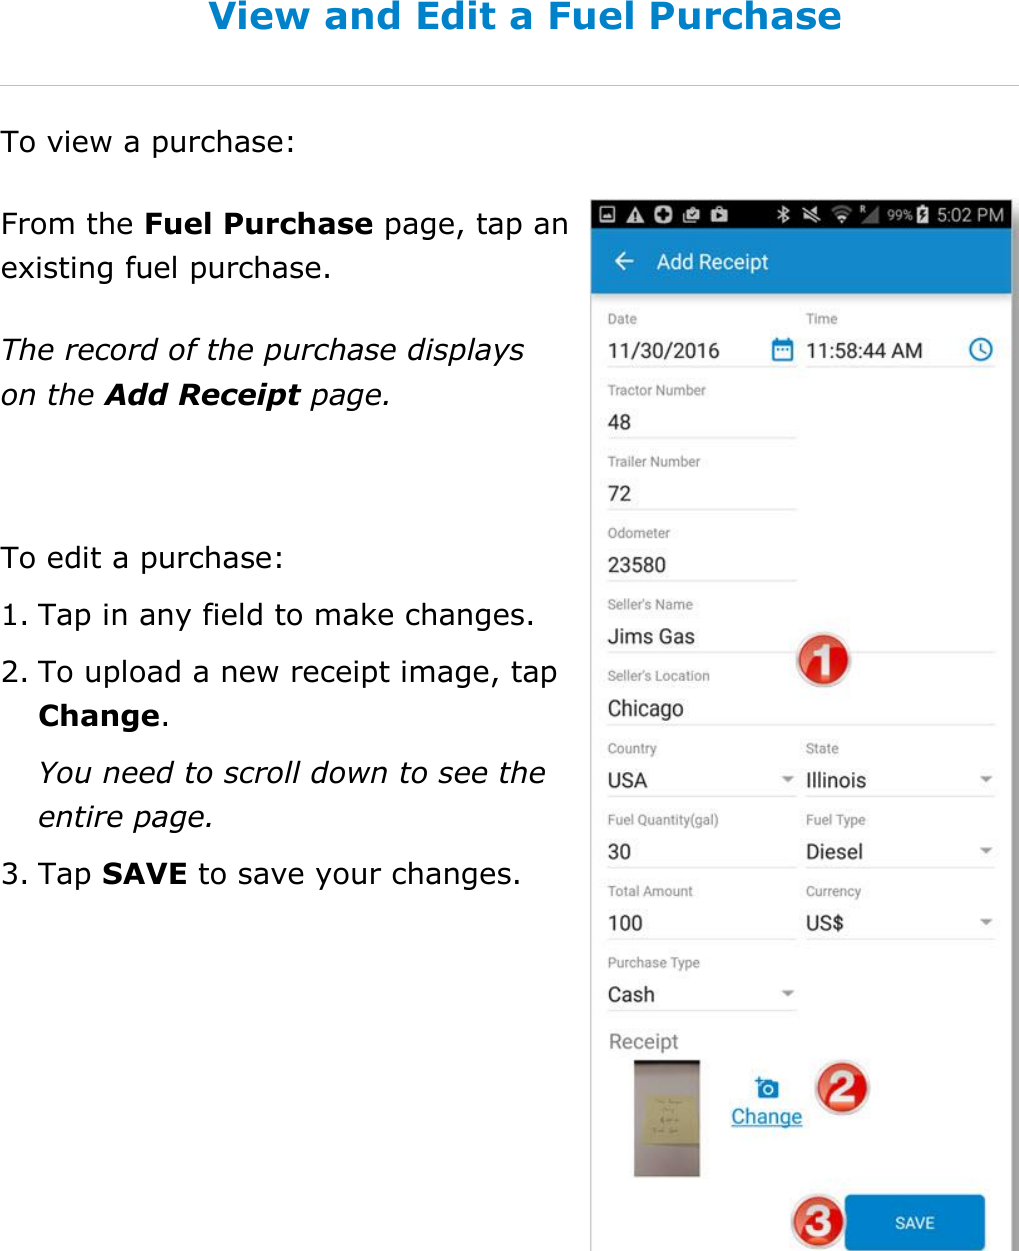 Manage Fuel Purchases DriverConnect User Guide  67 © 2017, Rand McNally, Inc. View and Edit a Fuel Purchase To view a purchase: From the Fuel Purchase page, tap an existing fuel purchase. The record of the purchase displays on the Add Receipt page.  To edit a purchase: 1. Tap in any field to make changes. 2. To upload a new receipt image, tap Change. You need to scroll down to see the entire page. 3. Tap SAVE to save your changes.    